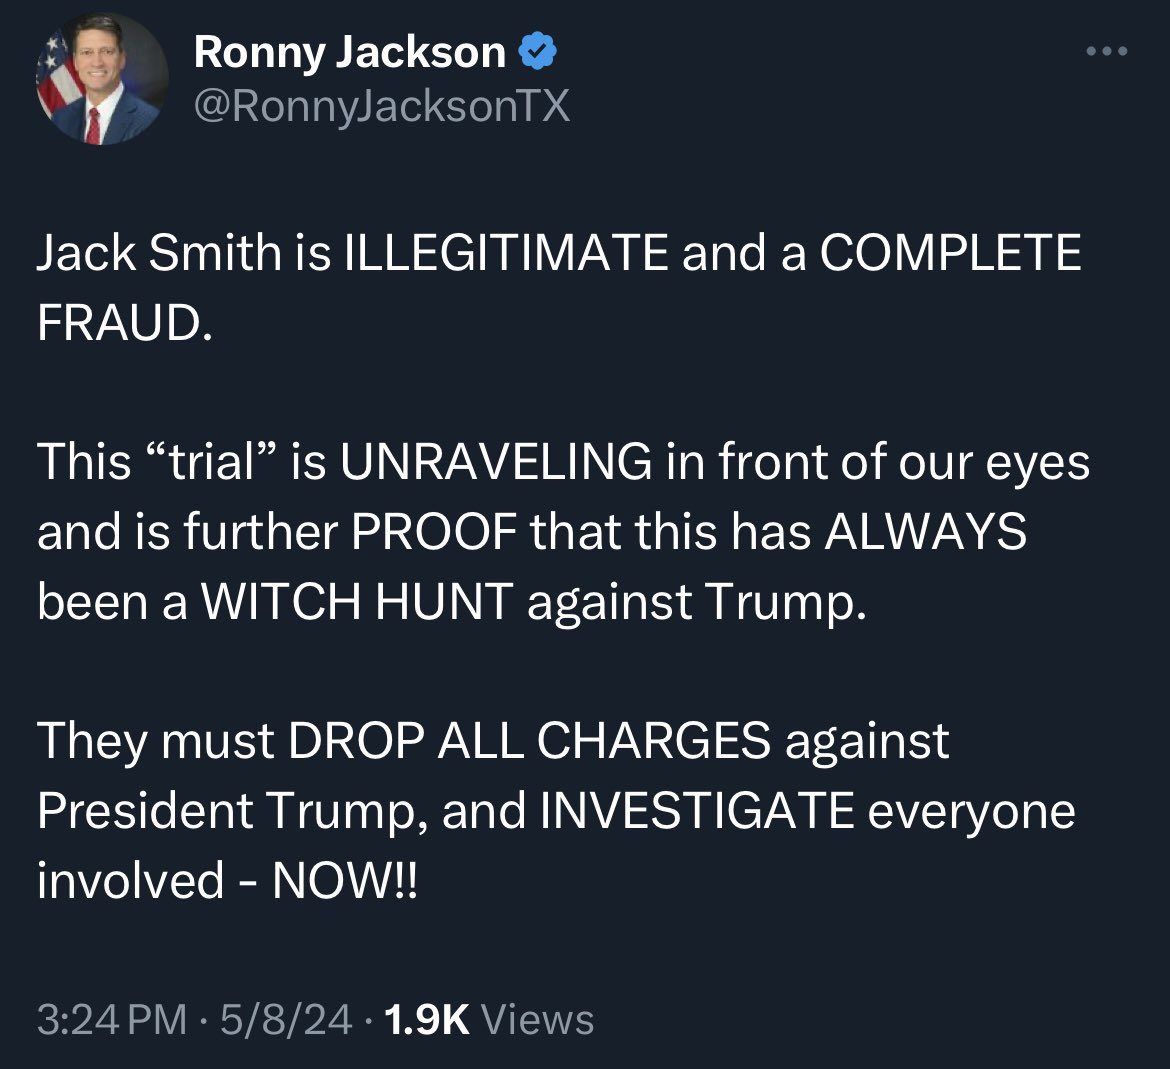 The only thing Ronny knows about what is happening in this trial comes from the law firm of Trump, Turley & Fitton.